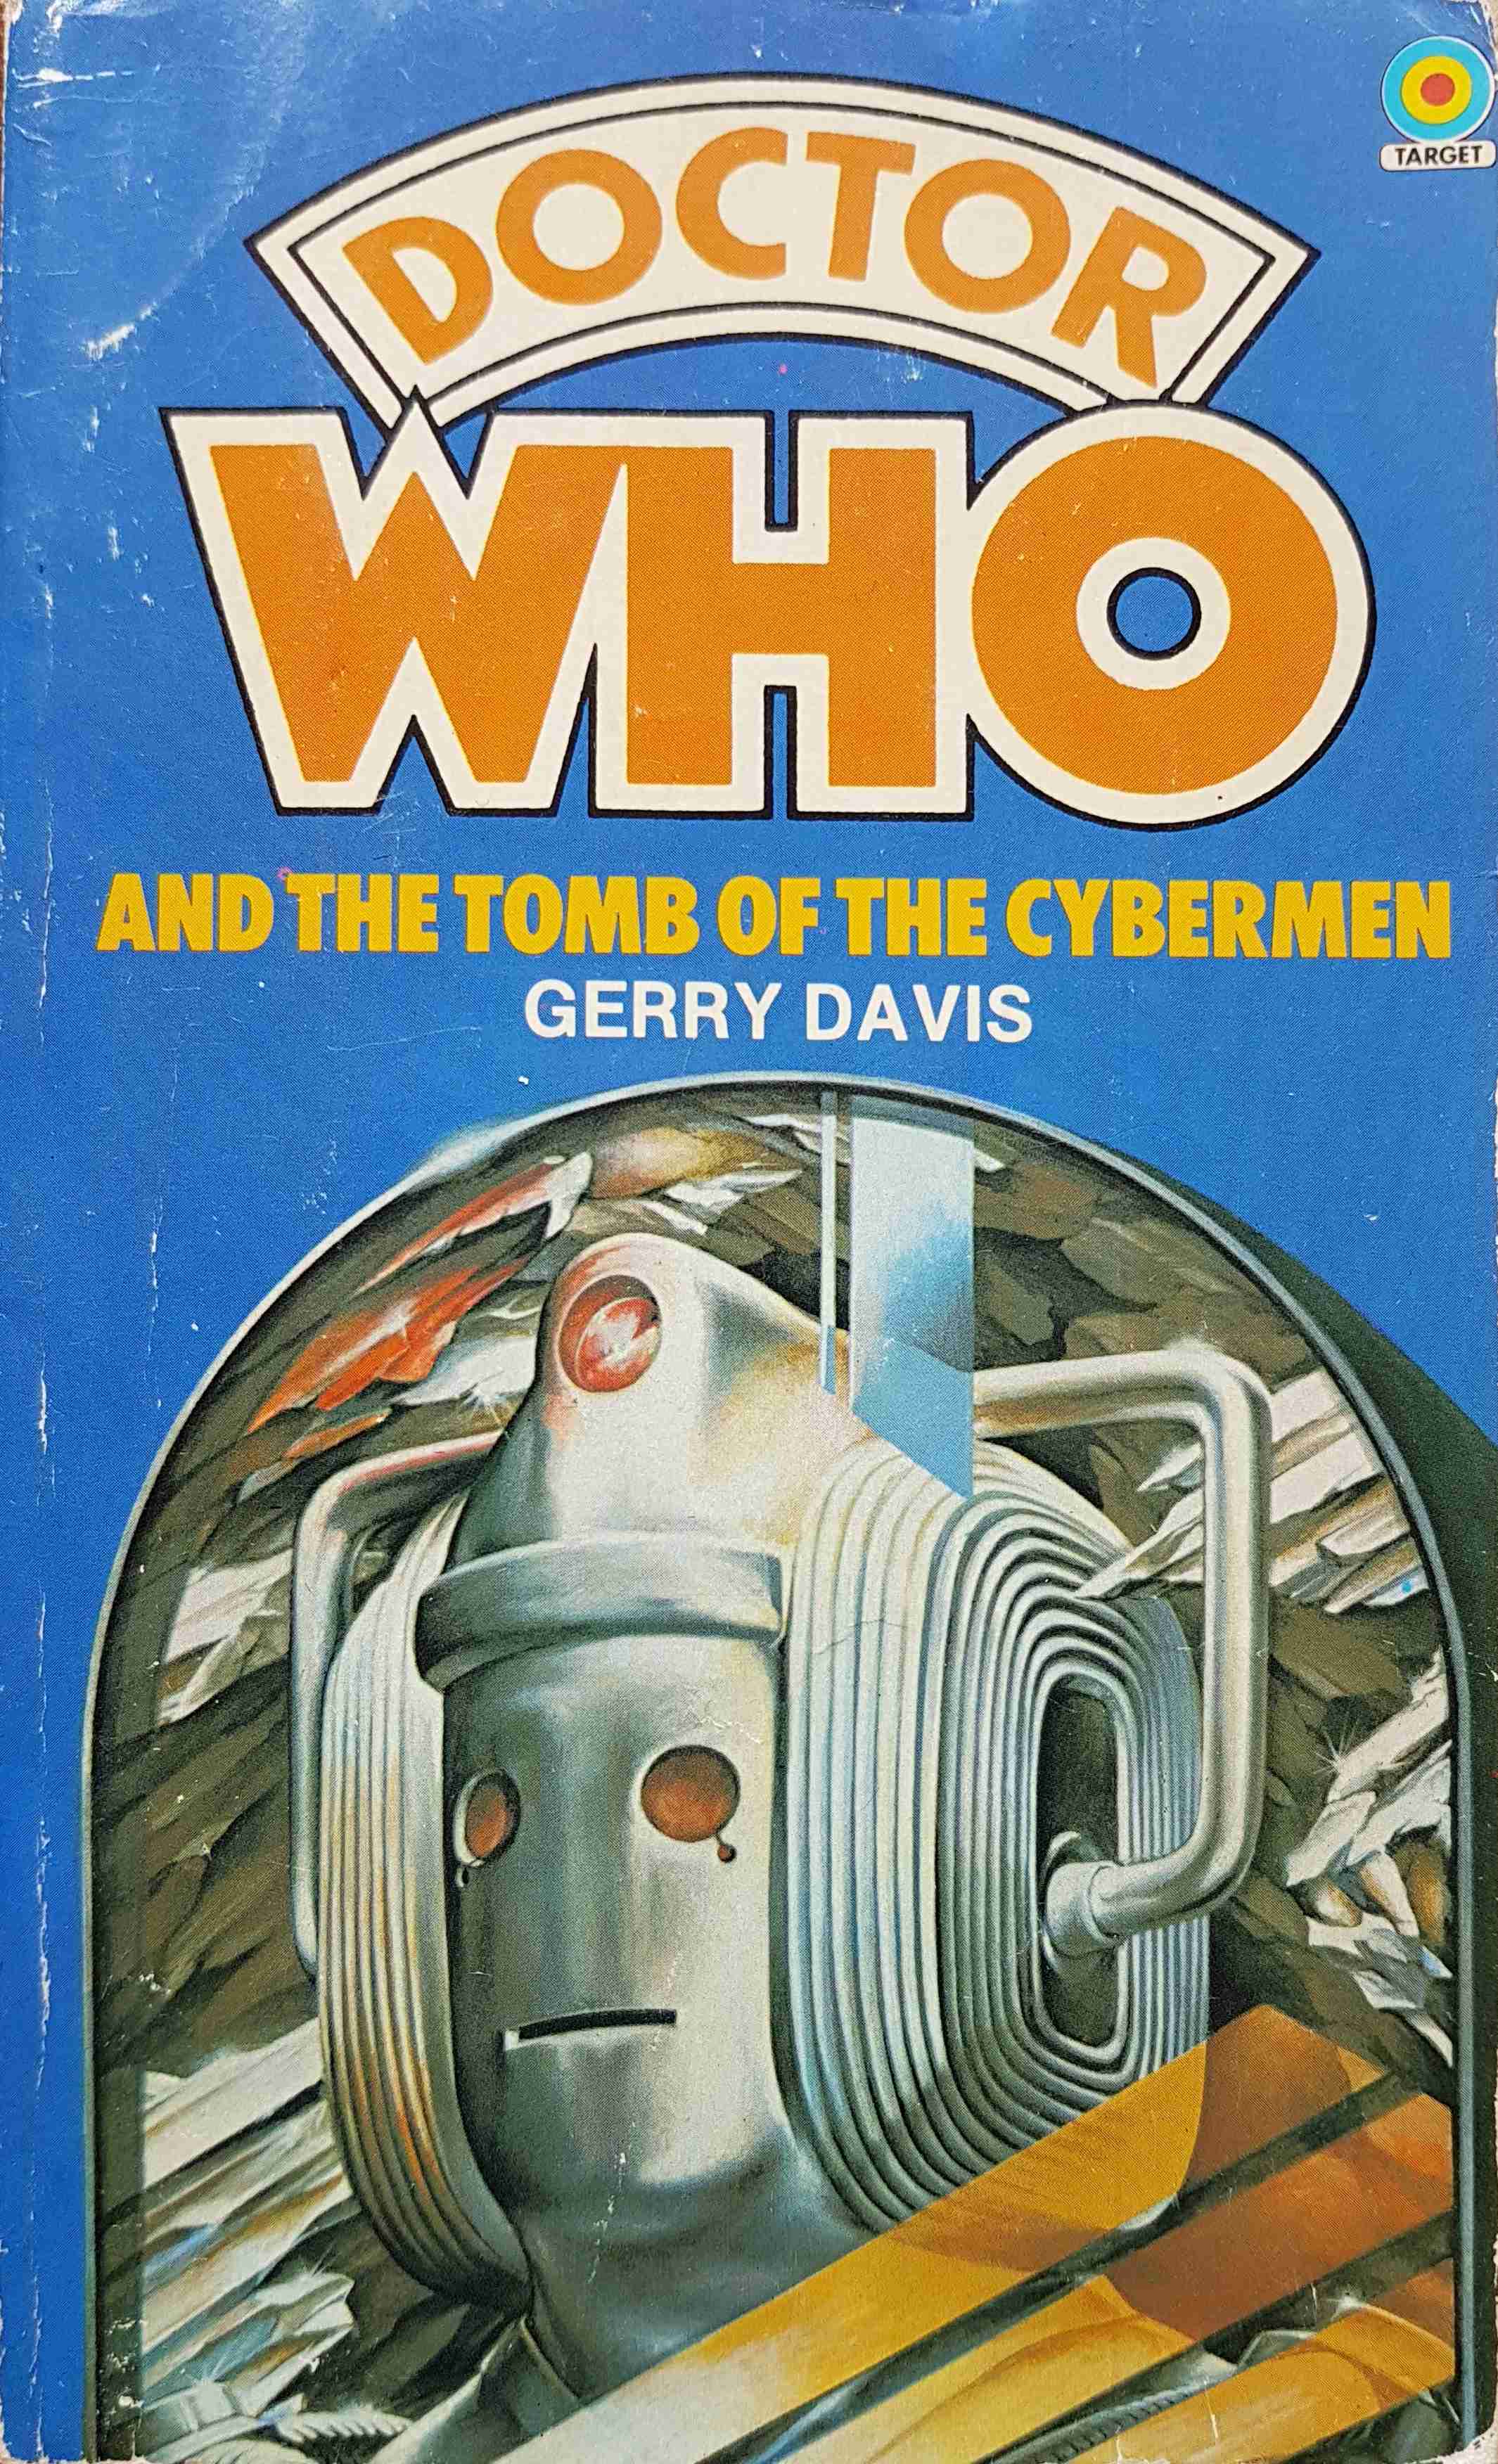 Picture of 0-426-11076-5 Doctor Who - Tomb of the Cybermen by artist Gerry Davis from the BBC books - Records and Tapes library